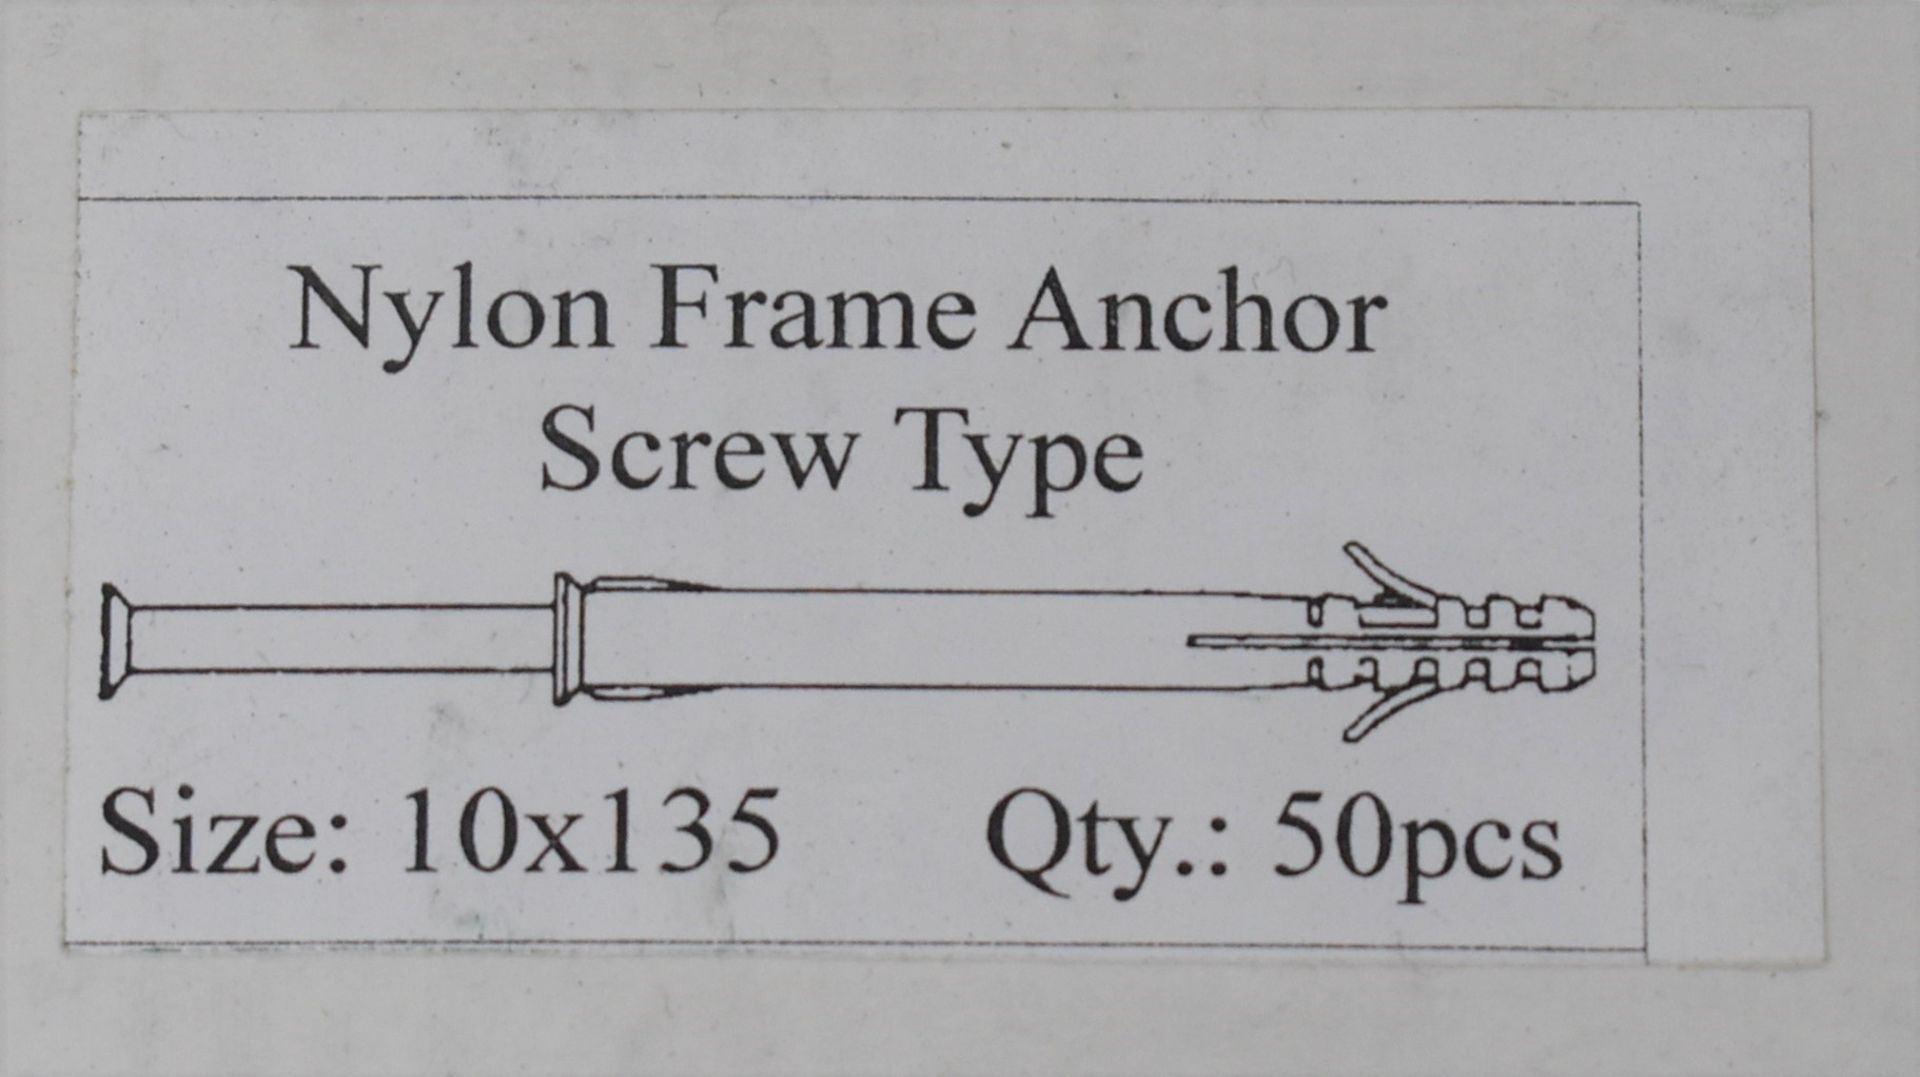 200 x Nylon Frame Screw Type Anchors - Size 10x135 - Supplied in 4 Boxes of 50 - Brand New Stock - - Image 3 of 3